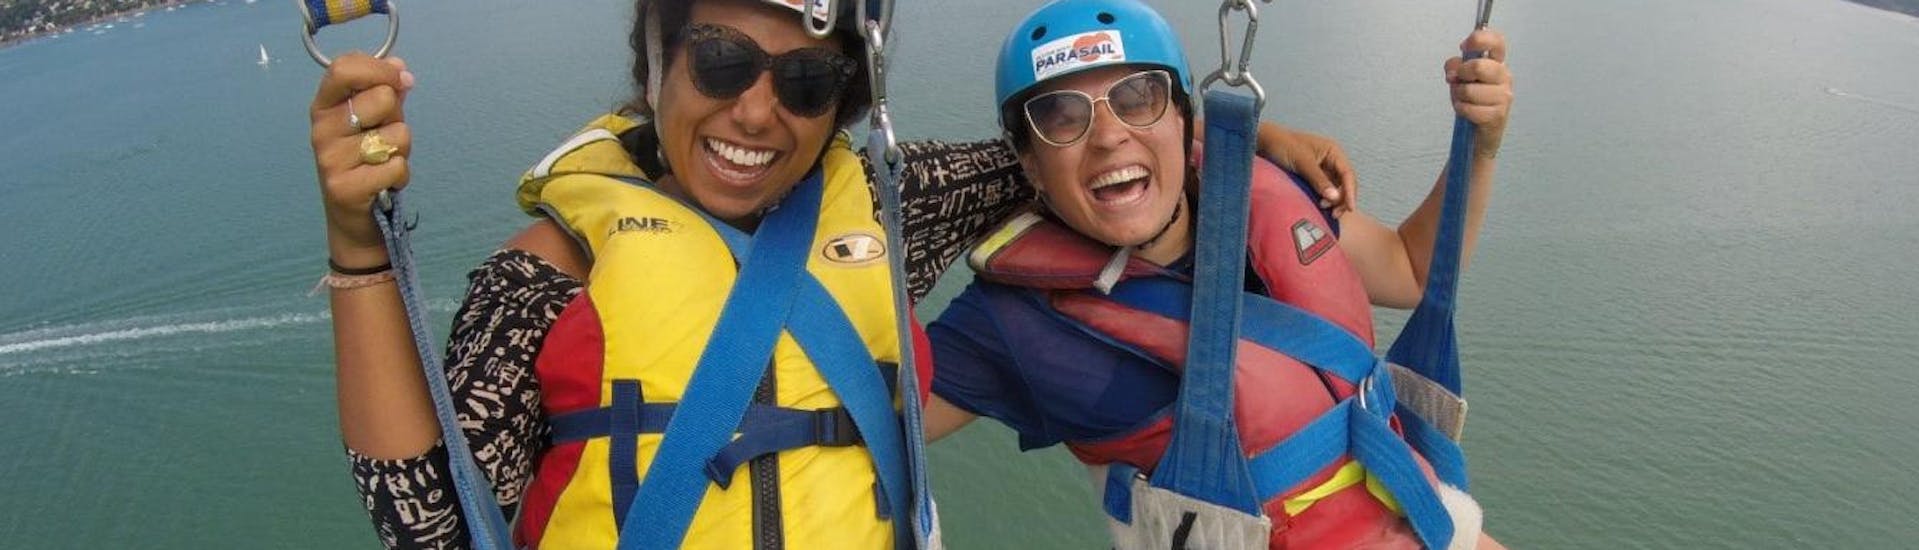 During the Private Parasailing in Paihia - For up to 12 People, two friends are having great time thanks to the experienced team of Bay of Islands Parasail.